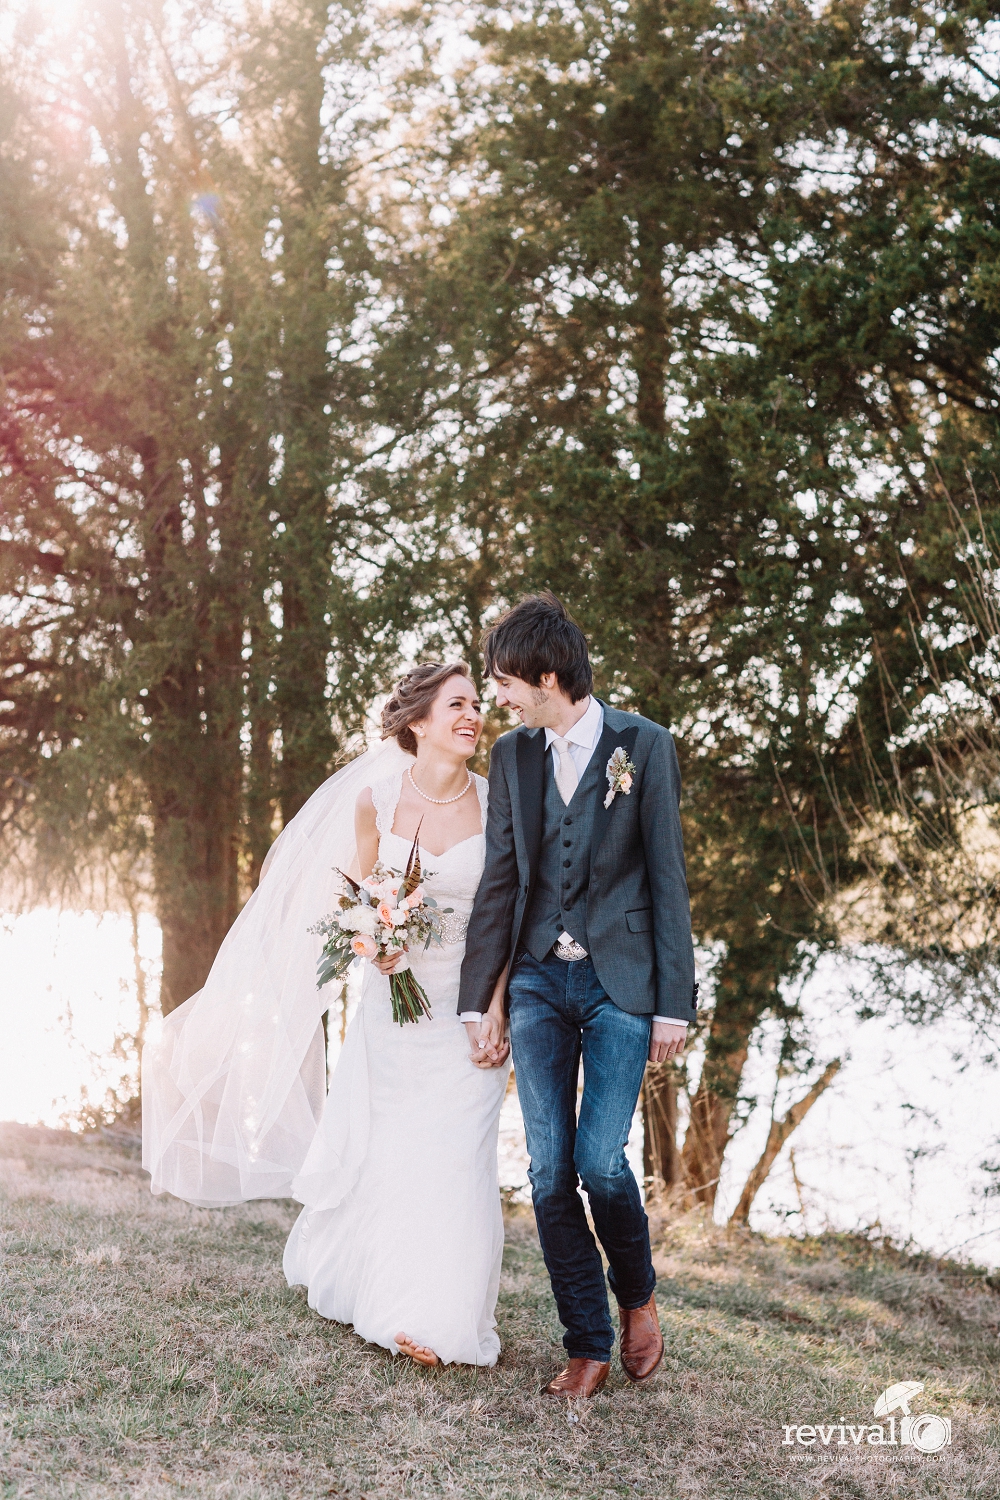 Emily + Mo Pitney's Wedding Day - Revival Photography | Husband + Wife ...